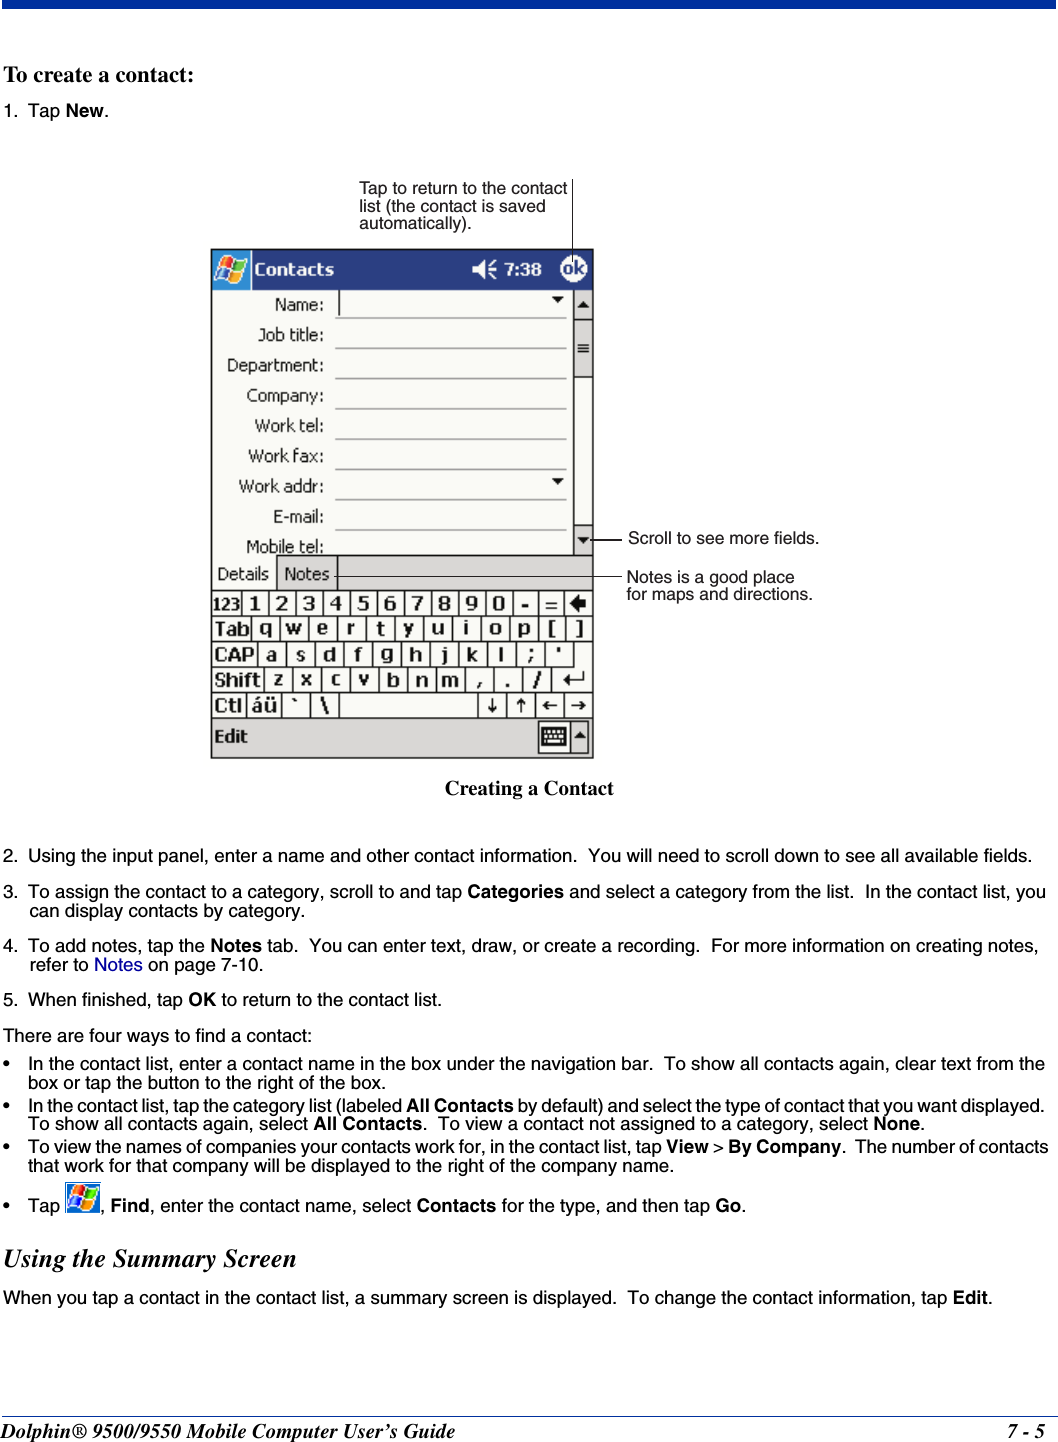 Dolphin® 9500/9550 Mobile Computer User’s Guide 7 - 5To create a contact:1. Tap New.2. Using the input panel, enter a name and other contact information.  You will need to scroll down to see all available fields.3. To assign the contact to a category, scroll to and tap Categories and select a category from the list.  In the contact list, you can display contacts by category.4. To add notes, tap the Notes tab.  You can enter text, draw, or create a recording.  For more information on creating notes, refer to Notes on page 7-10.5. When finished, tap OK to return to the contact list.There are four ways to find a contact: • In the contact list, enter a contact name in the box under the navigation bar.  To show all contacts again, clear text from the box or tap the button to the right of the box.  • In the contact list, tap the category list (labeled All Contacts by default) and select the type of contact that you want displayed.  To show all contacts again, select All Contacts.  To view a contact not assigned to a category, select None.  • To view the names of companies your contacts work for, in the contact list, tap View &gt; By Company.  The number of contacts that work for that company will be displayed to the right of the company name.  •Tap , Find, enter the contact name, select Contacts for the type, and then tap Go.  Using the Summary ScreenWhen you tap a contact in the contact list, a summary screen is displayed.  To change the contact information, tap Edit.Notes is a good placefor maps and directions.Tap to return to the contactlist (the contact is savedautomatically).Scroll to see more fields.Creating a Contact